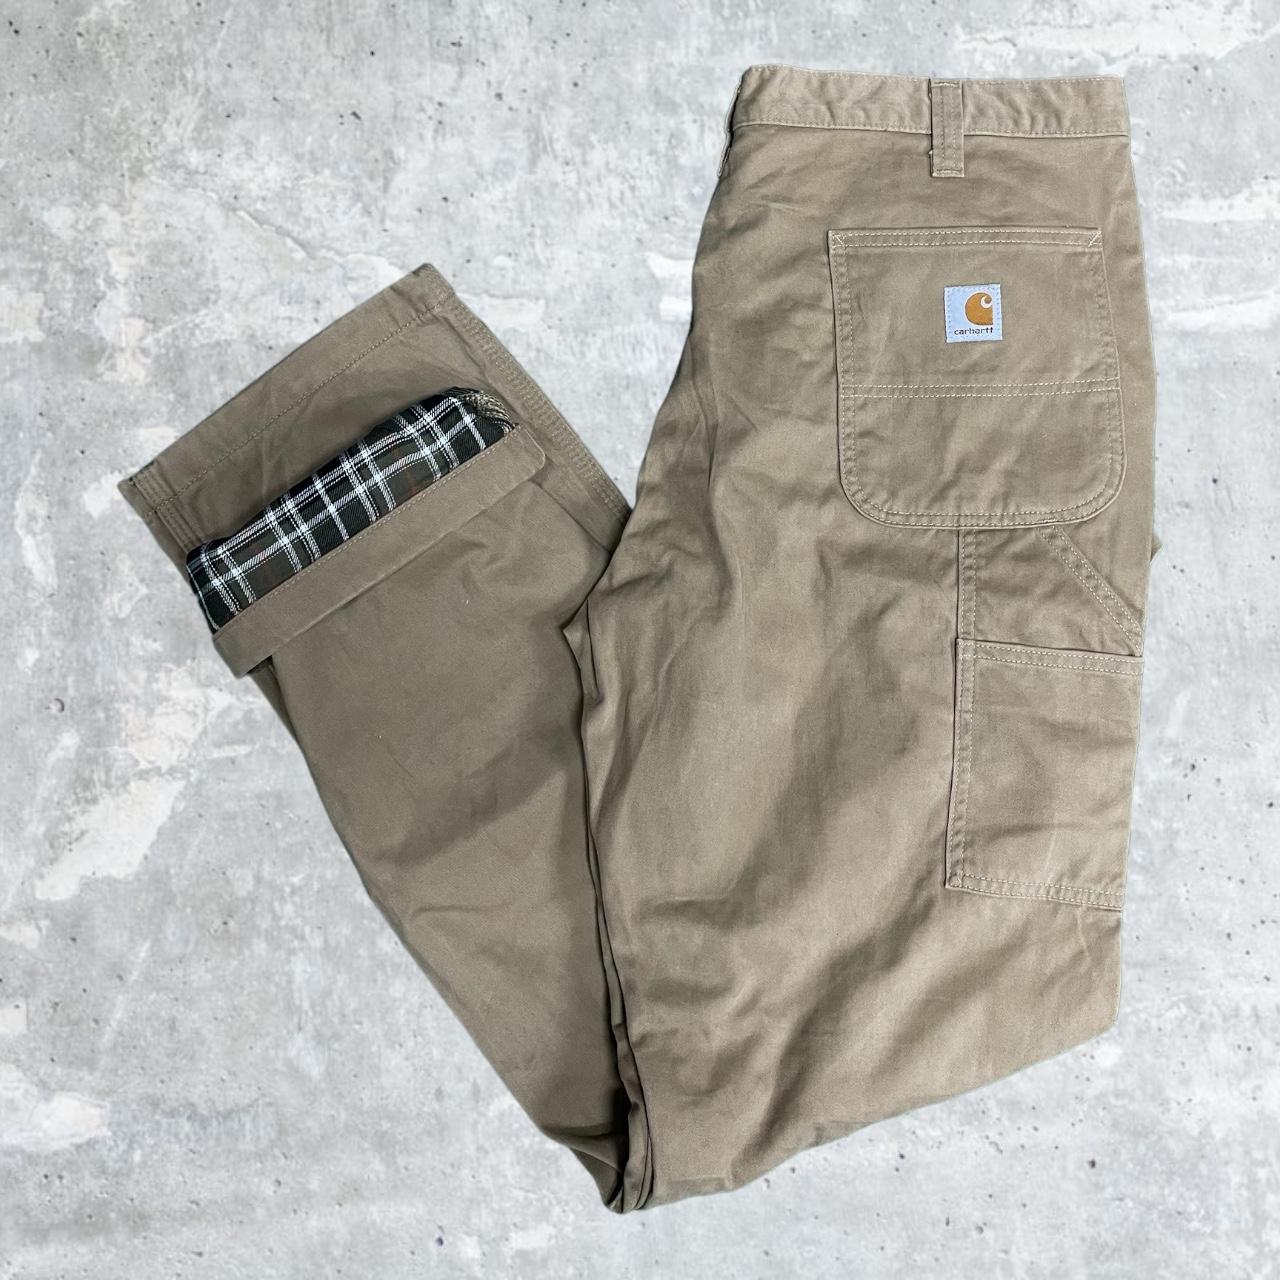 Vintage Carhartt Insulated Carpenter Pants in a Size... - Depop